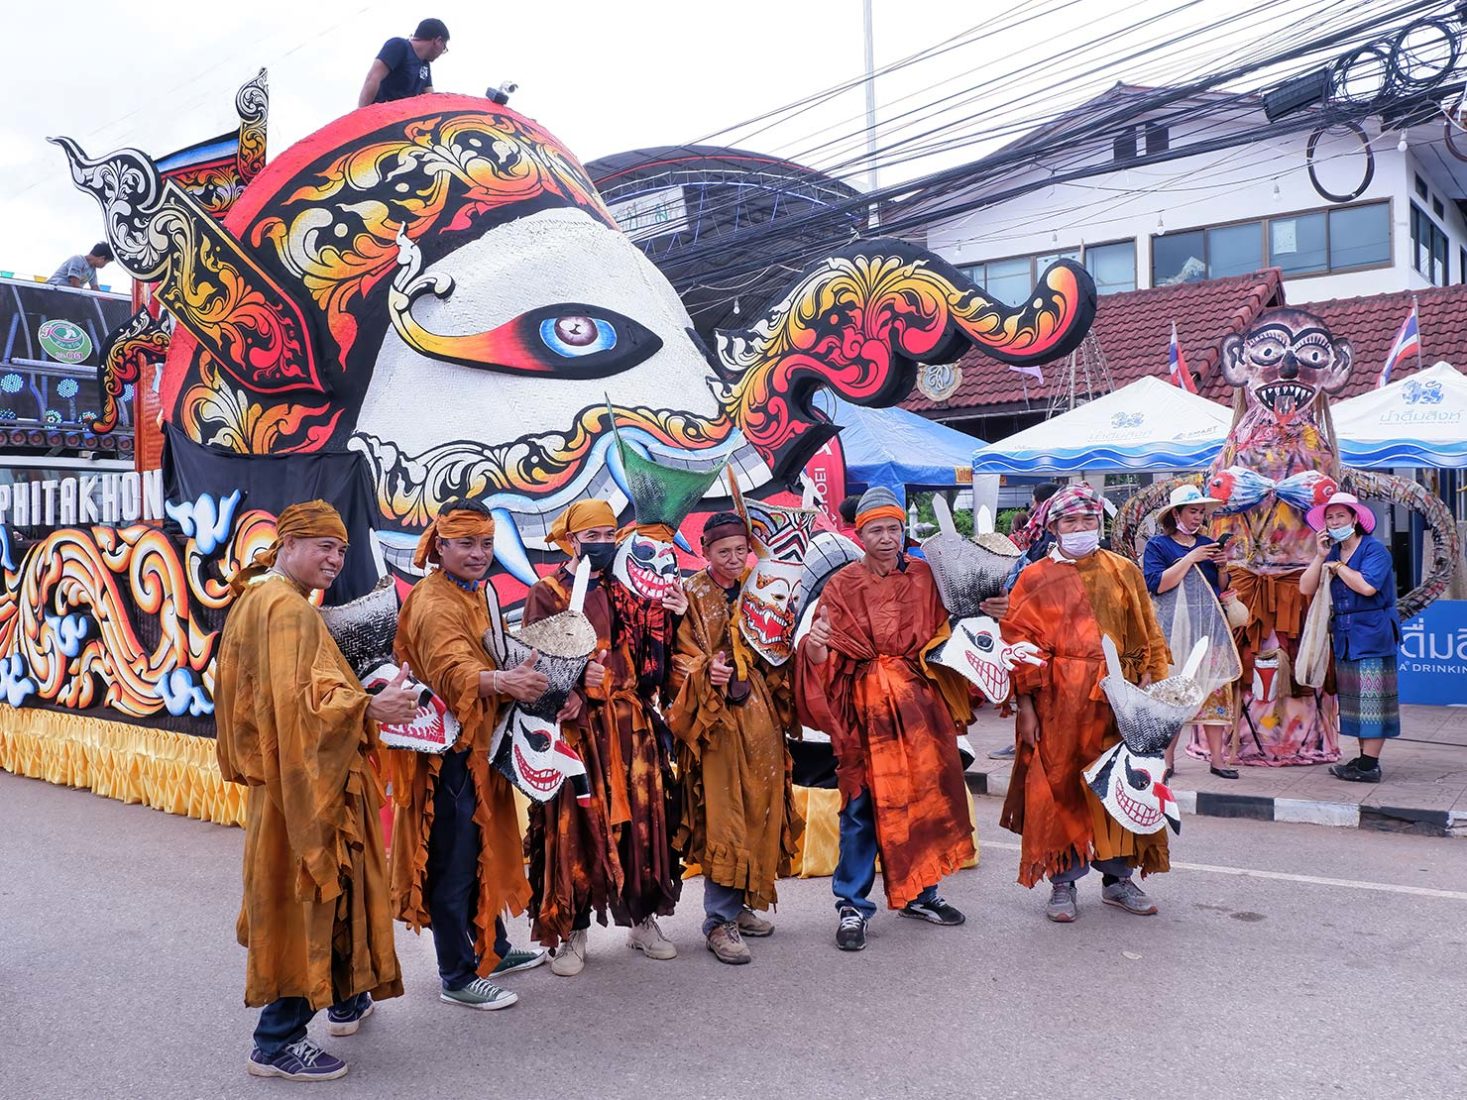 Local men in costume pose in front of a parade float that features a huge Phi ta Khon mask